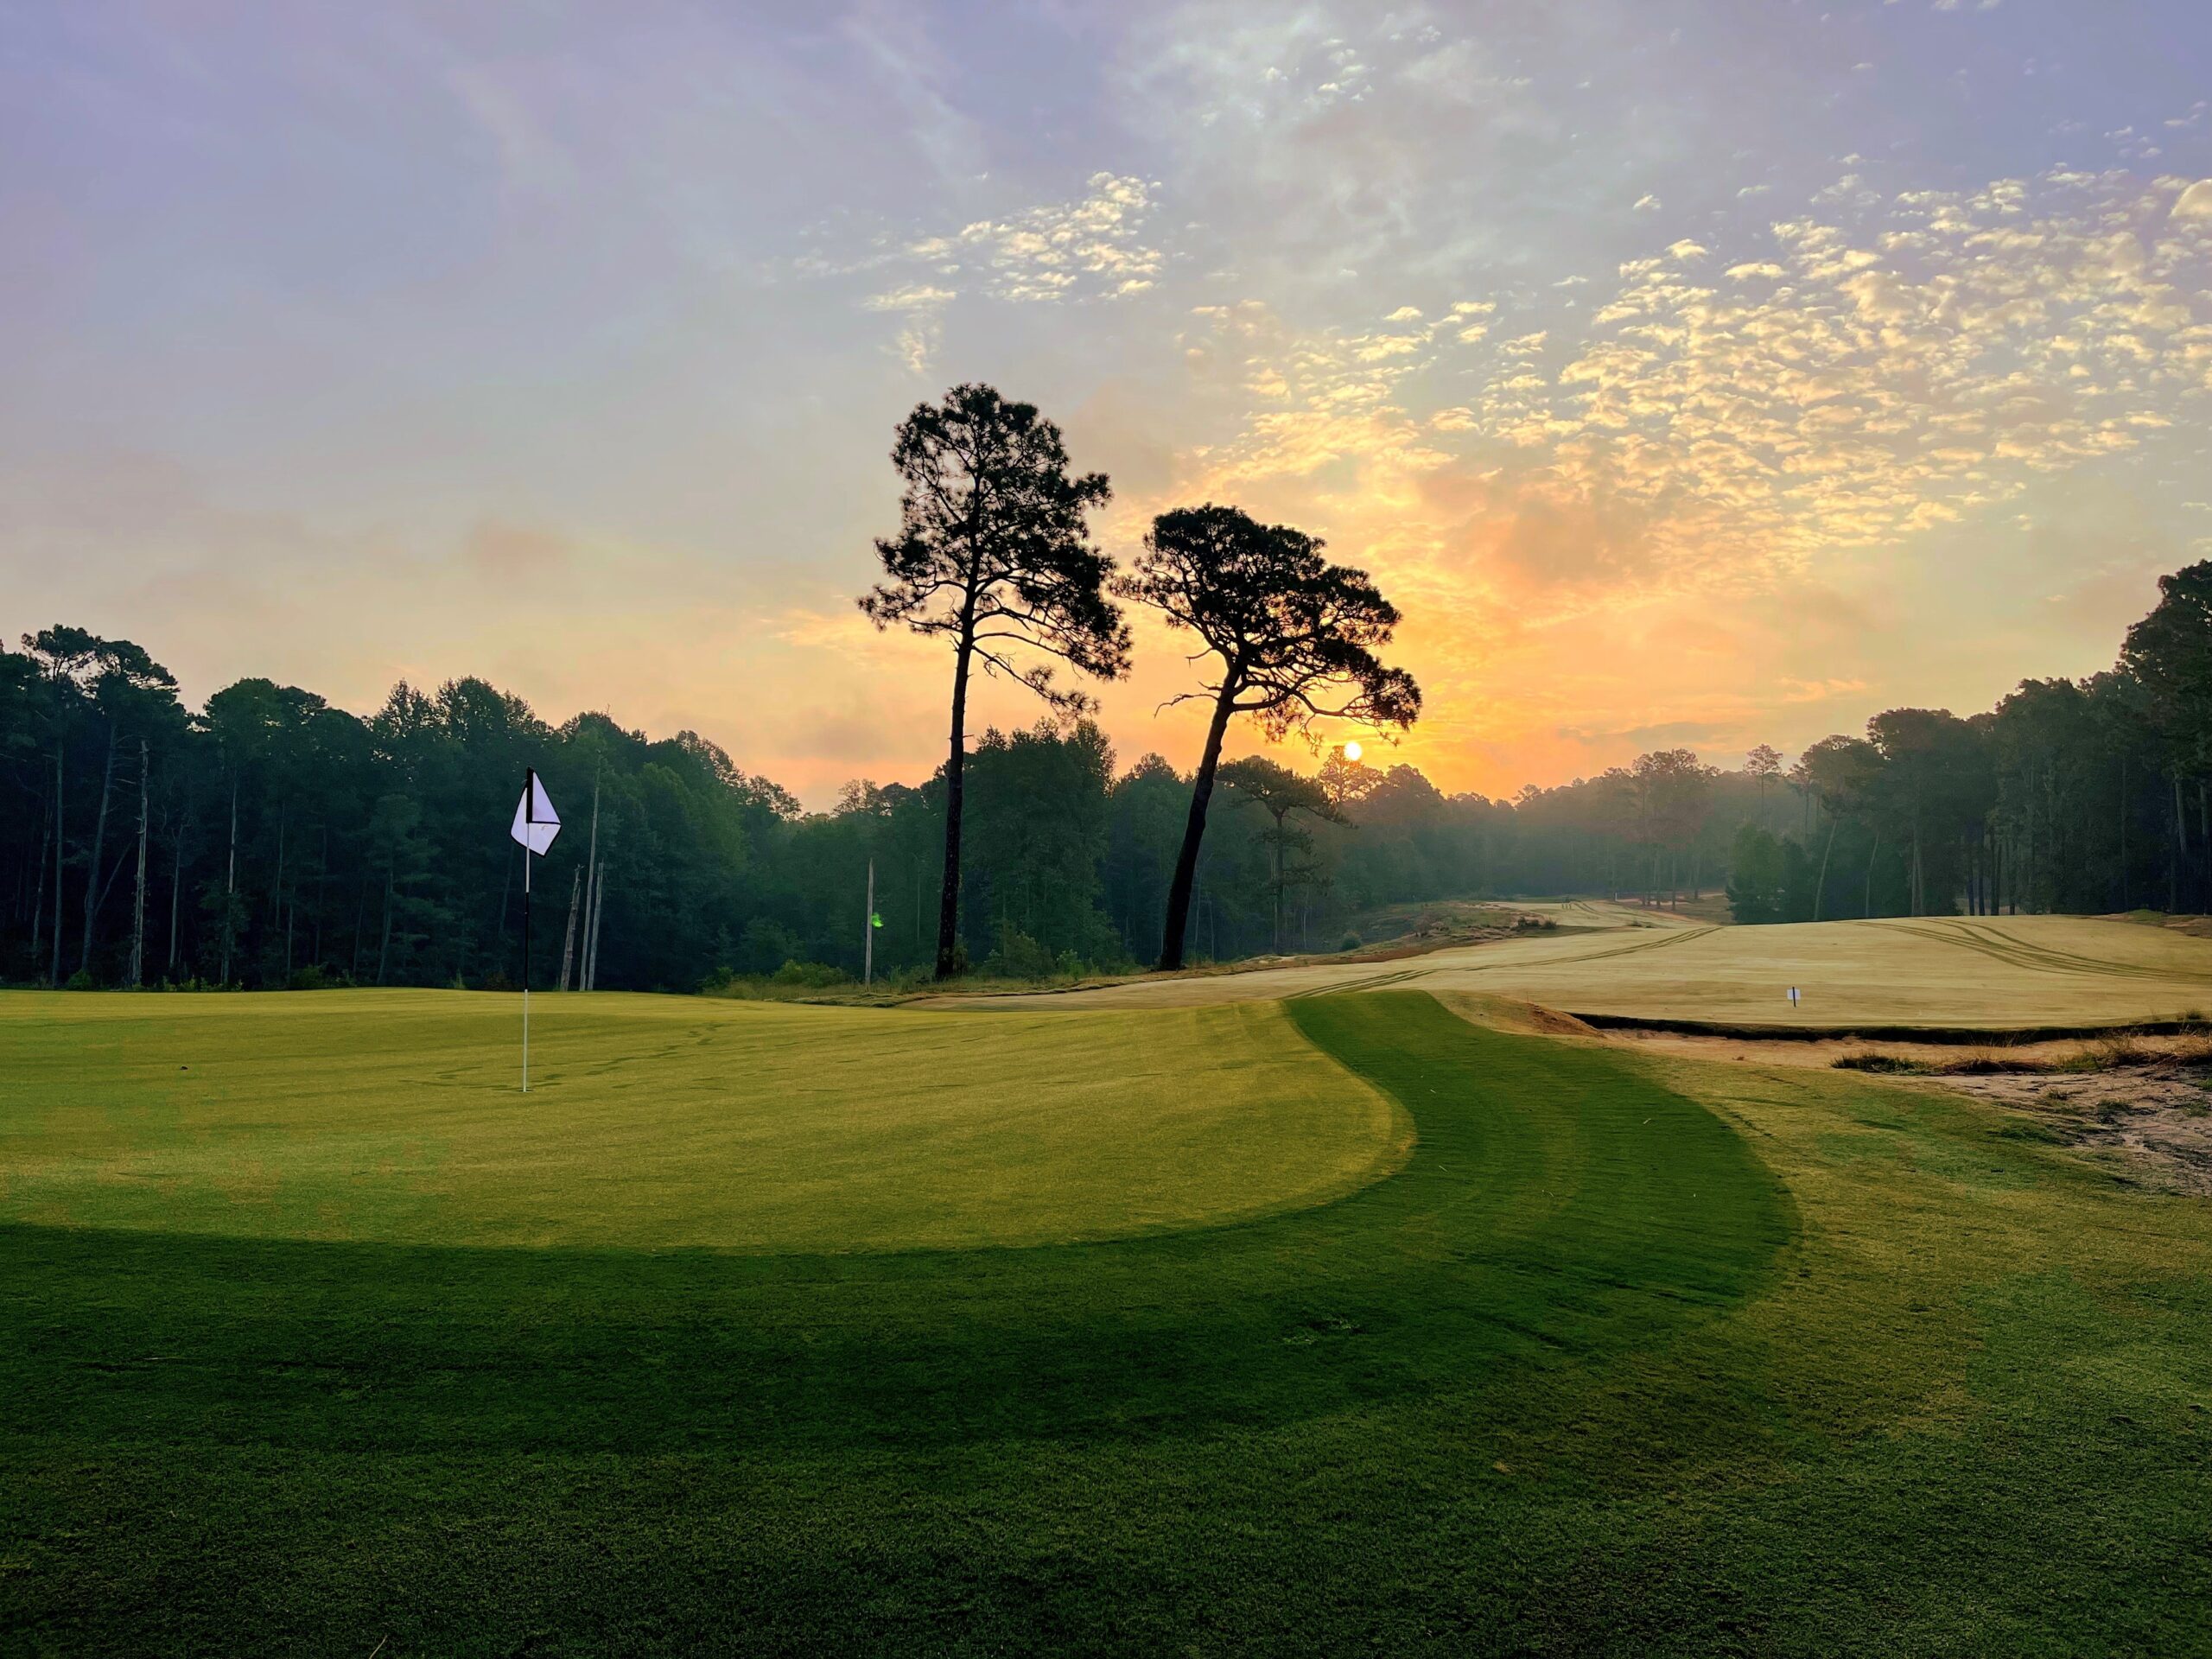 SOUTHERN PINES GOLF CLUB RECOGNIZED FOR BEST COURSE RESTORATION